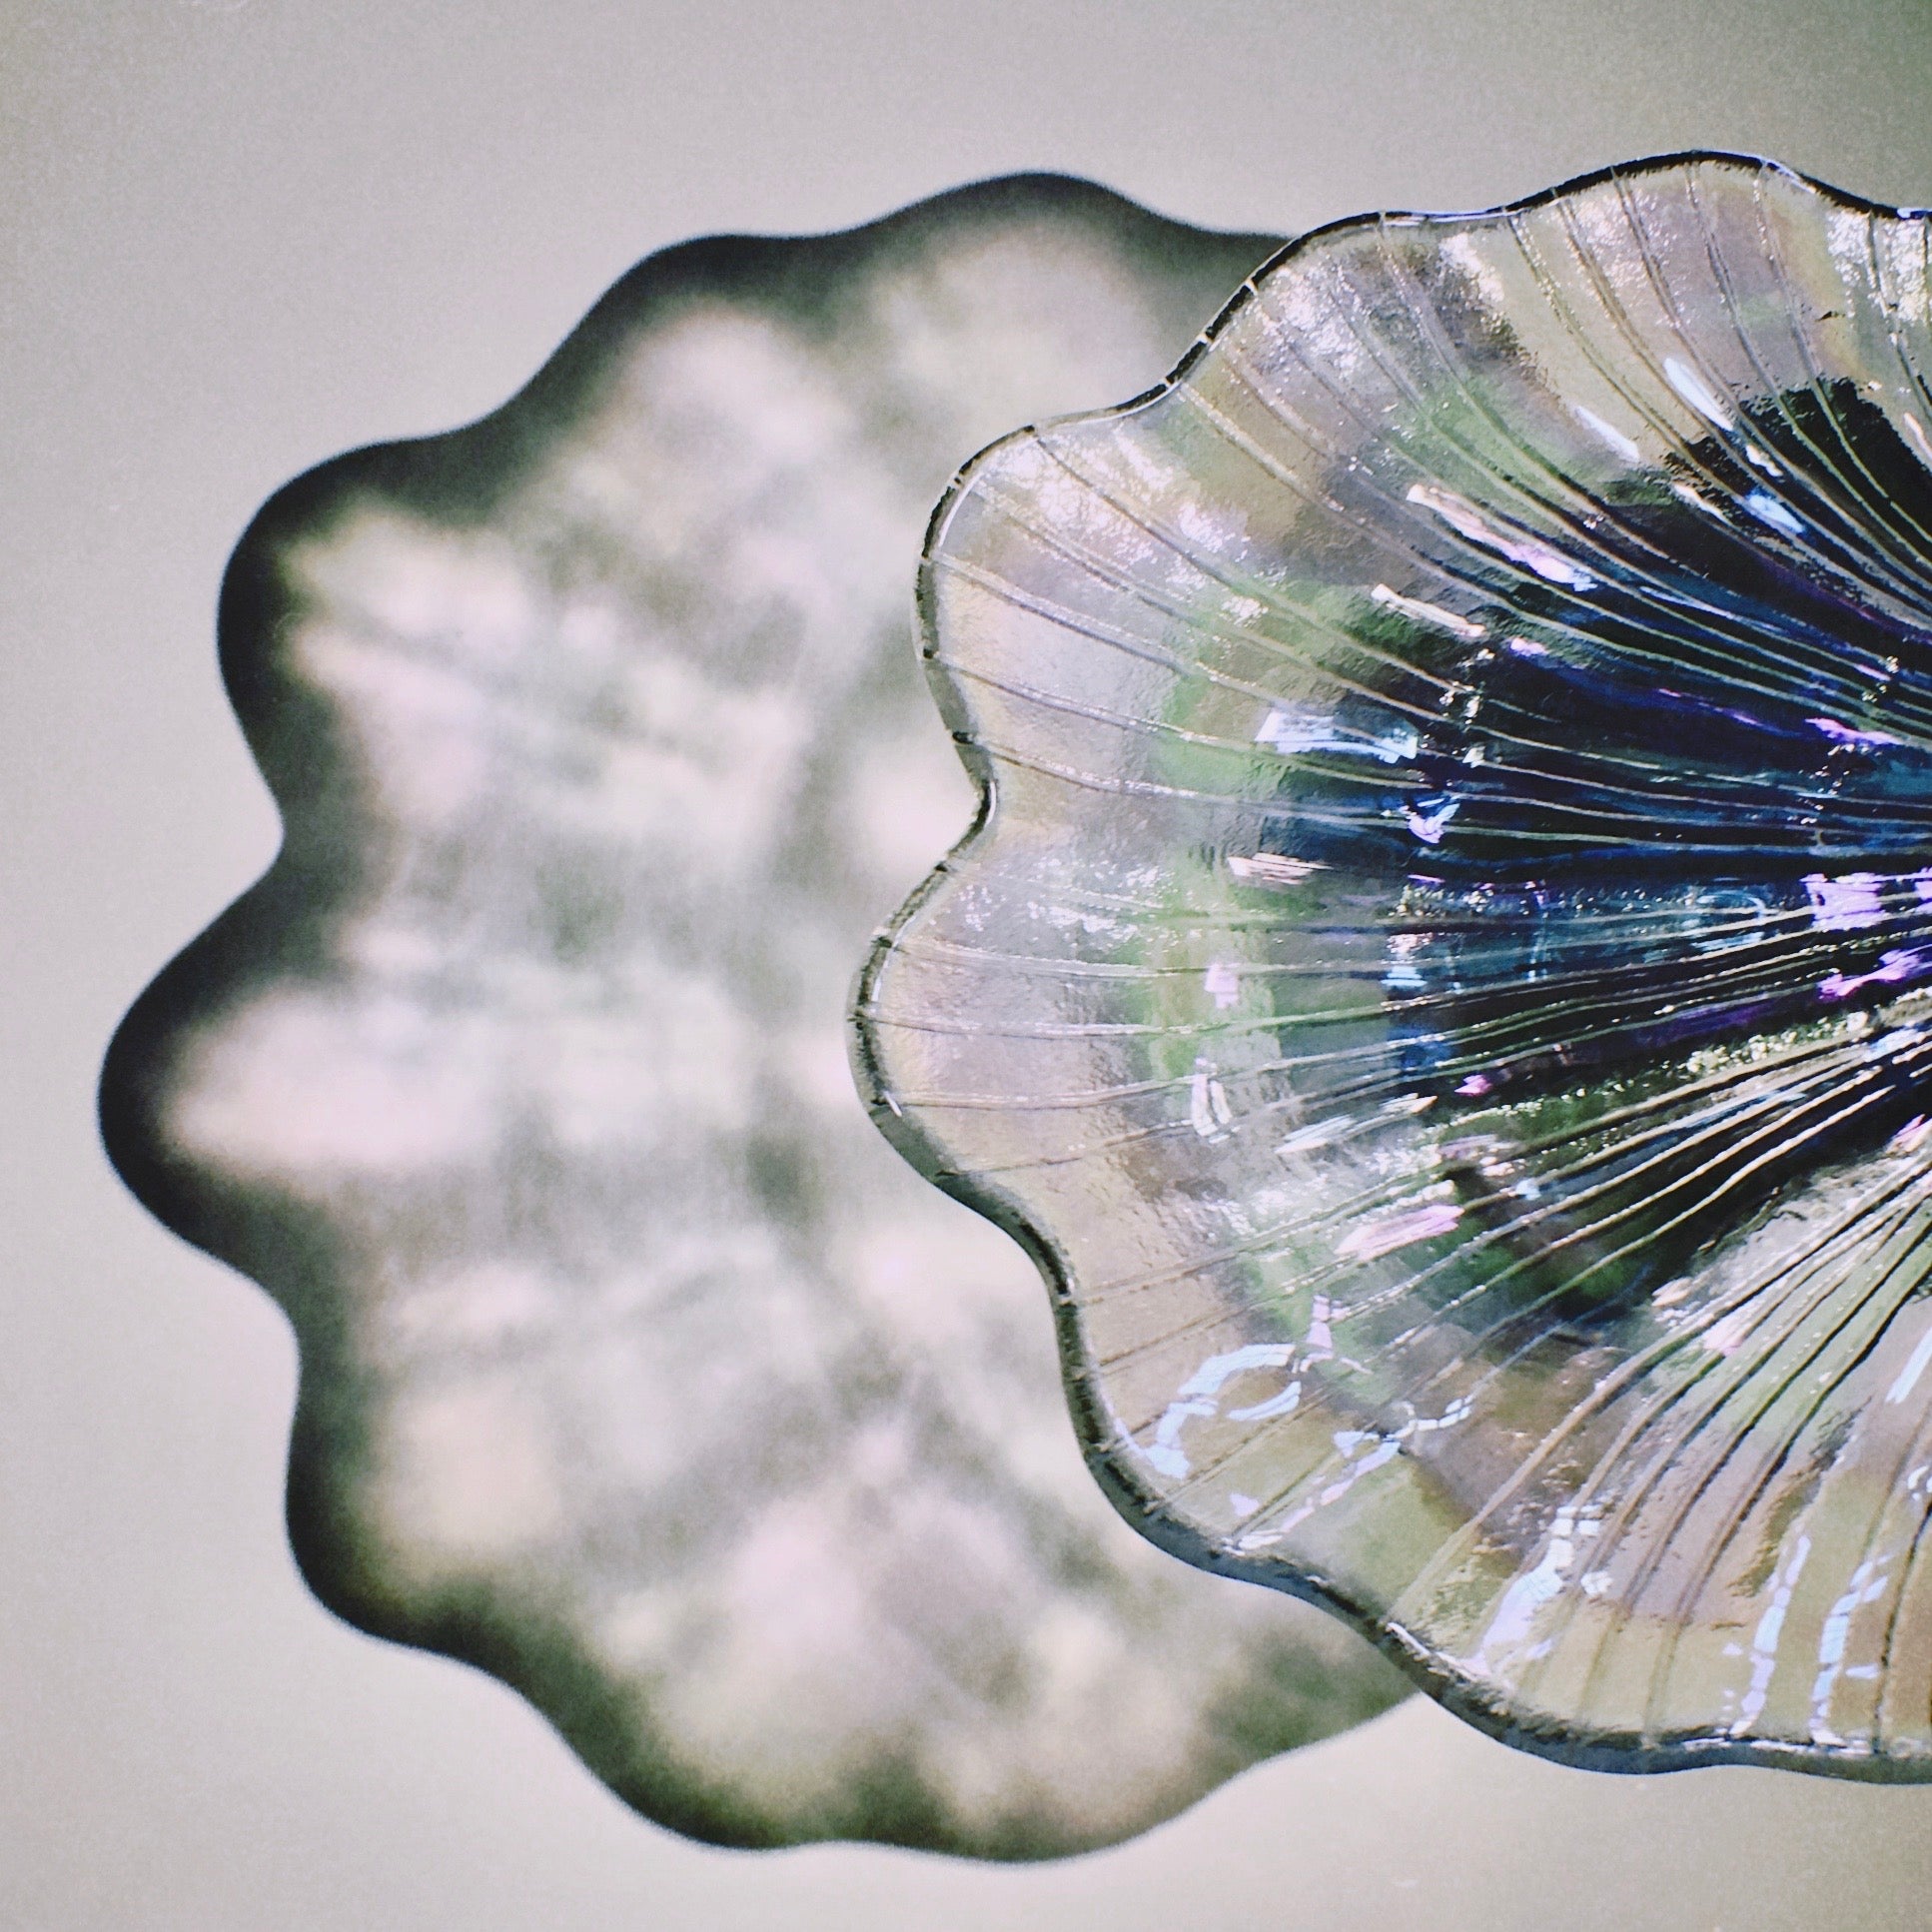 Holographic Shell Plates by PROSE Tabletop